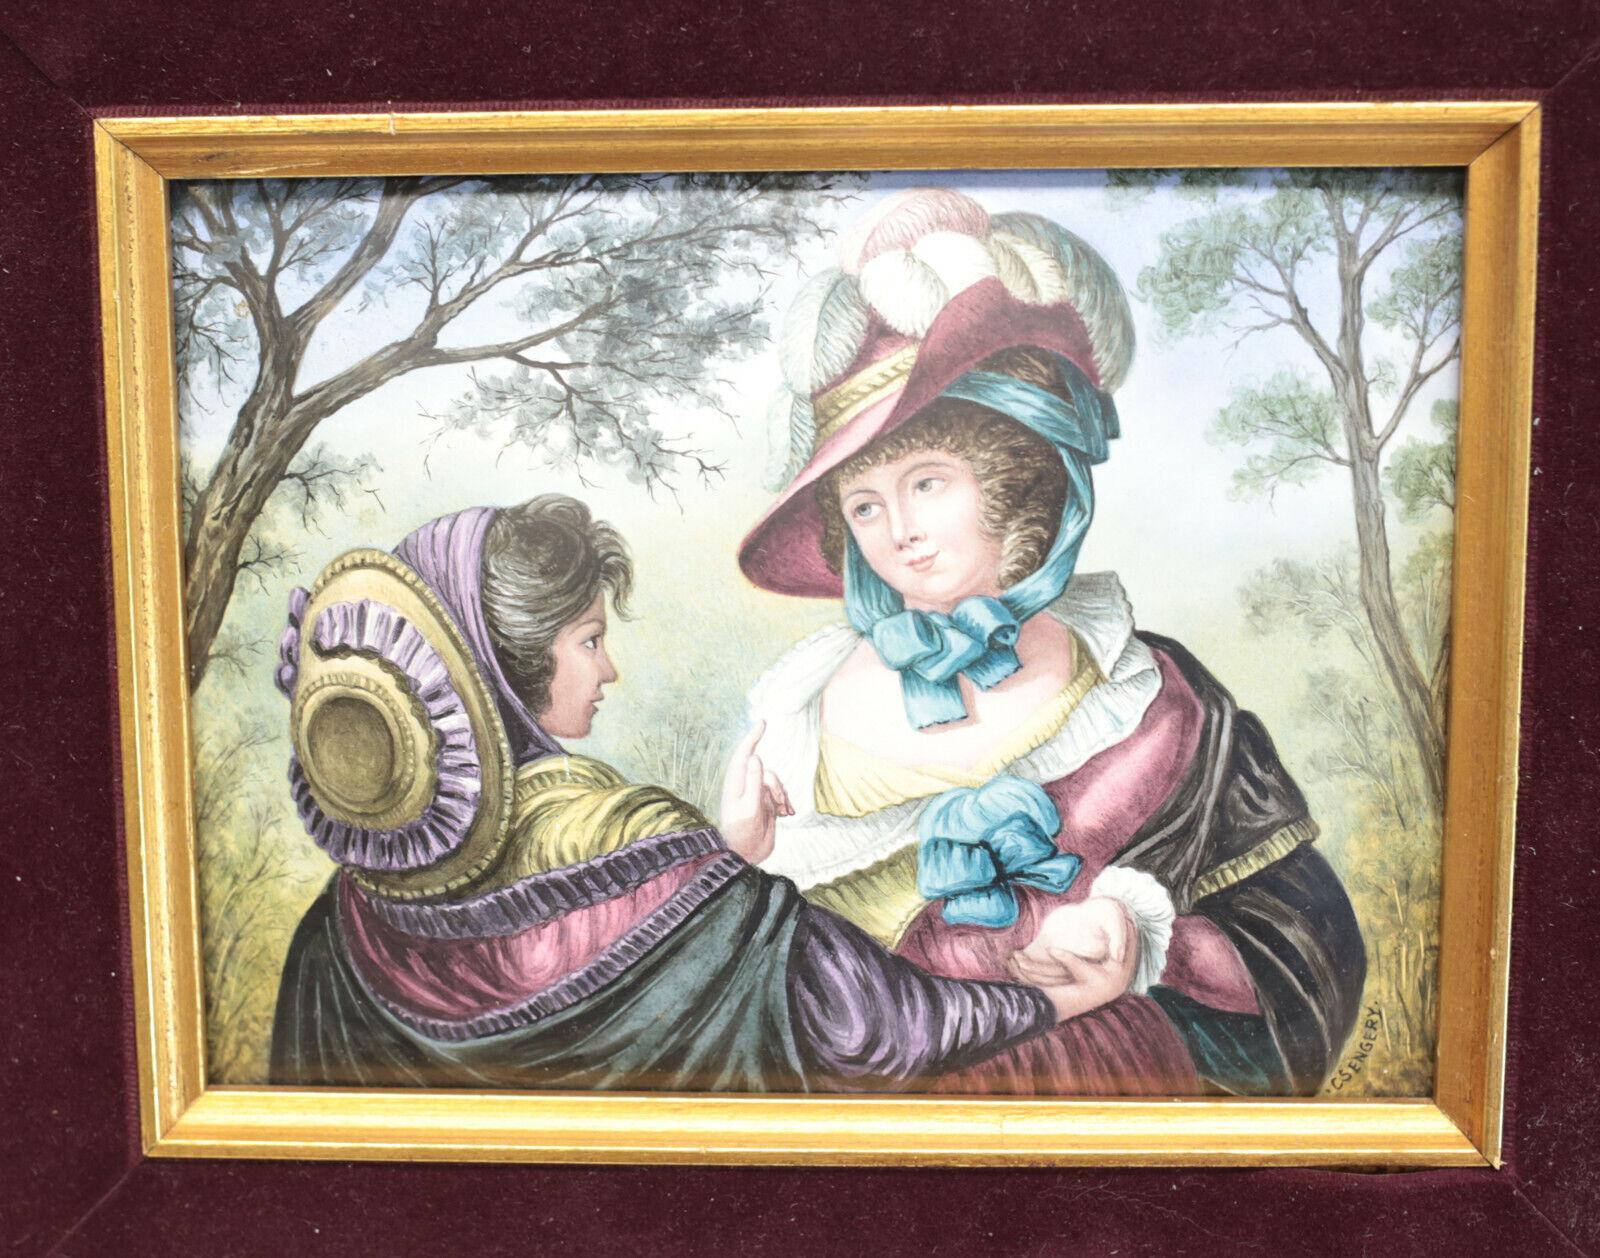 Unique Continental Enamel on Curved Copper Plaque, 19th century or Earlier.

Charming hand painted plaque period era women in the woods. Signed CS ENGERY to the lower right hand corner. Framed in a velvet rimmed frame.

Additional